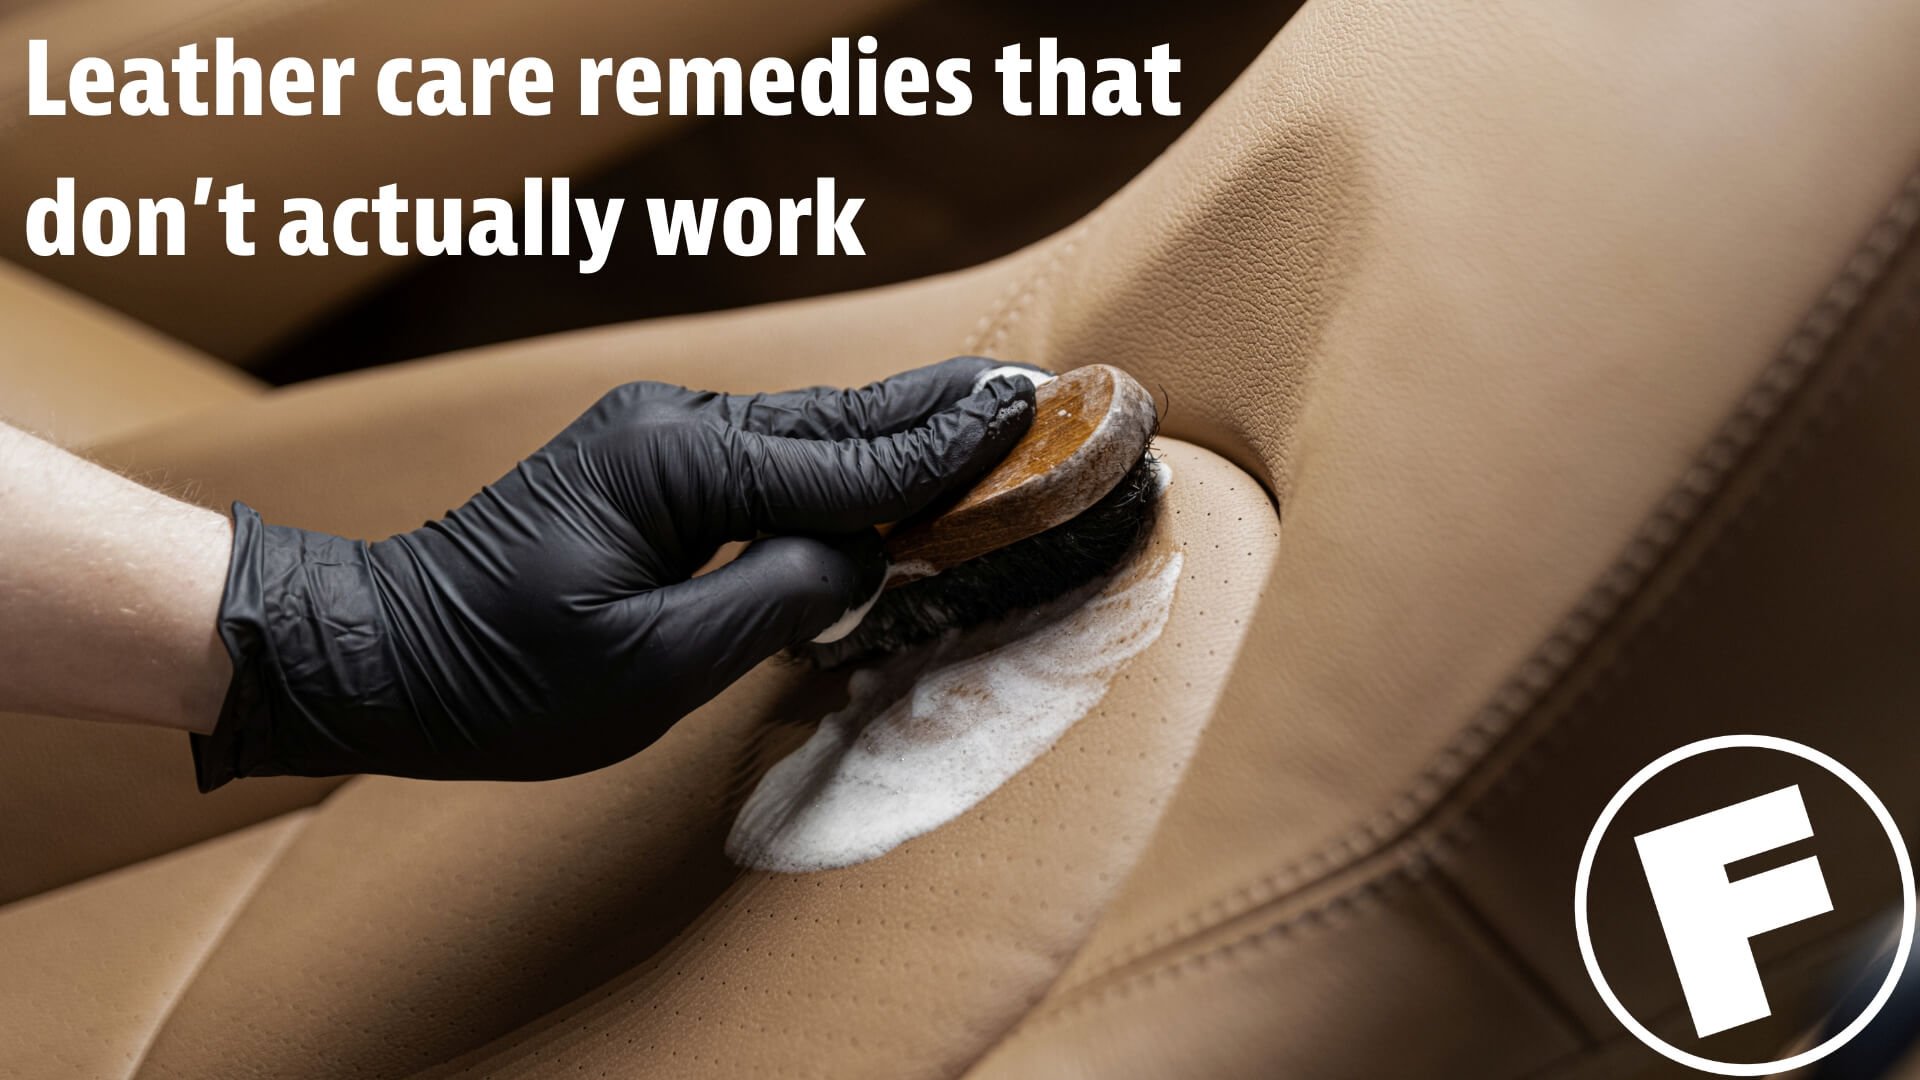 How to clean and restore leather: Tips and tricks from the experts